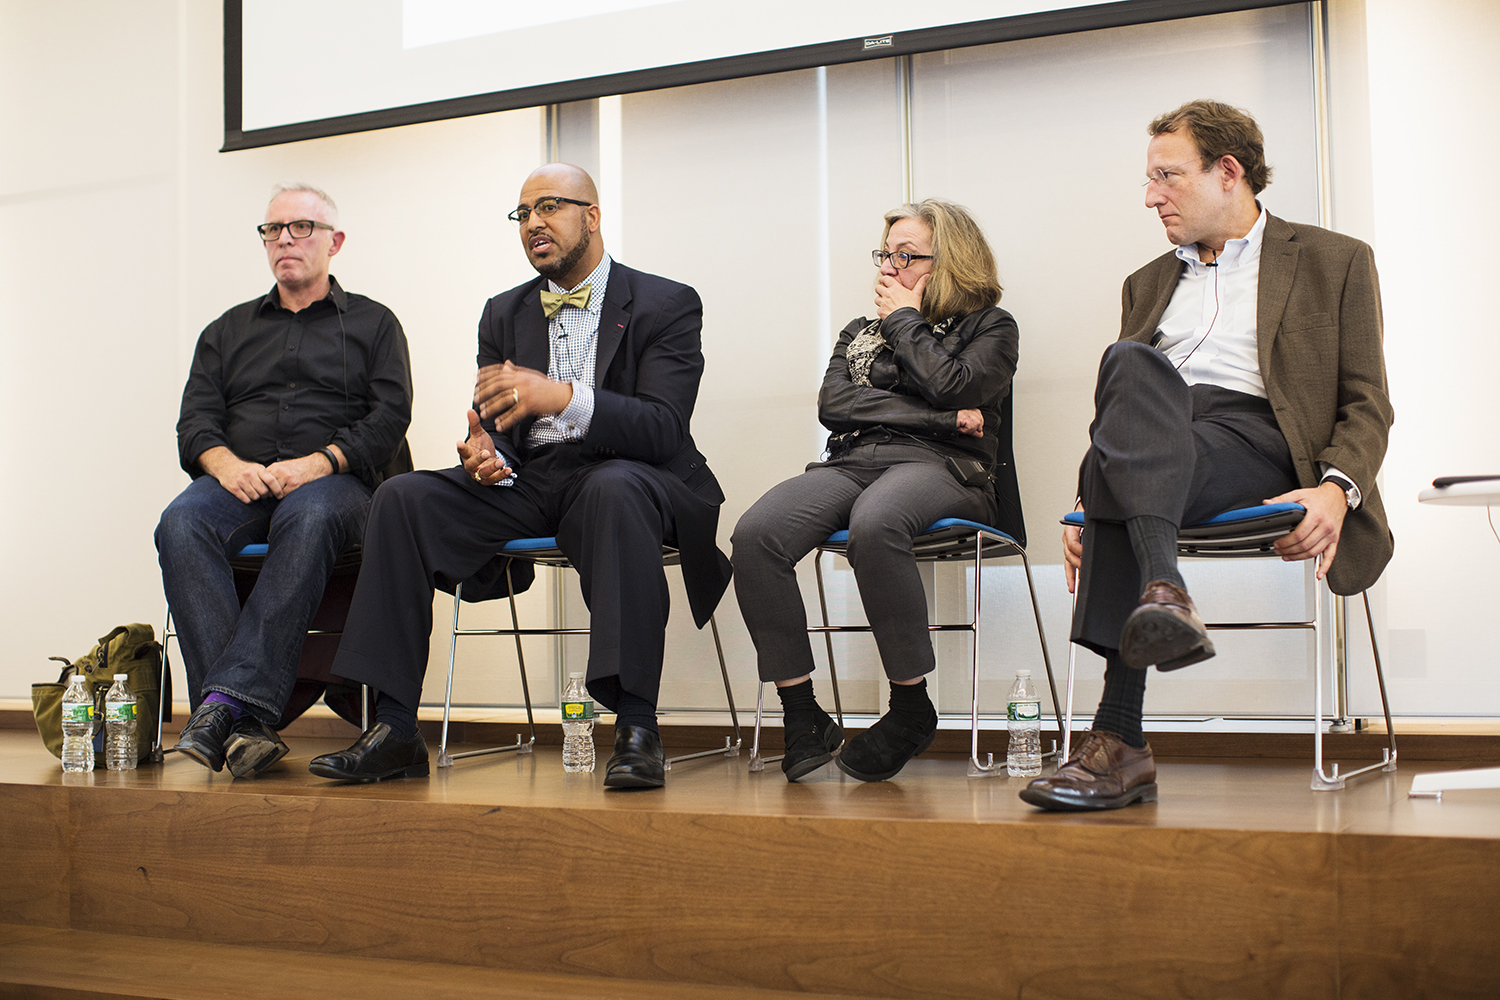  "The Press and Photography" panel, with Aidan Sullivan (Getty Images), Kenny Irby (Poynter Institute), Michele McNally (NY Times), Santiago Lyon (Associated Press), Columbia Journalism School, NY, NY, October 16, 2015 